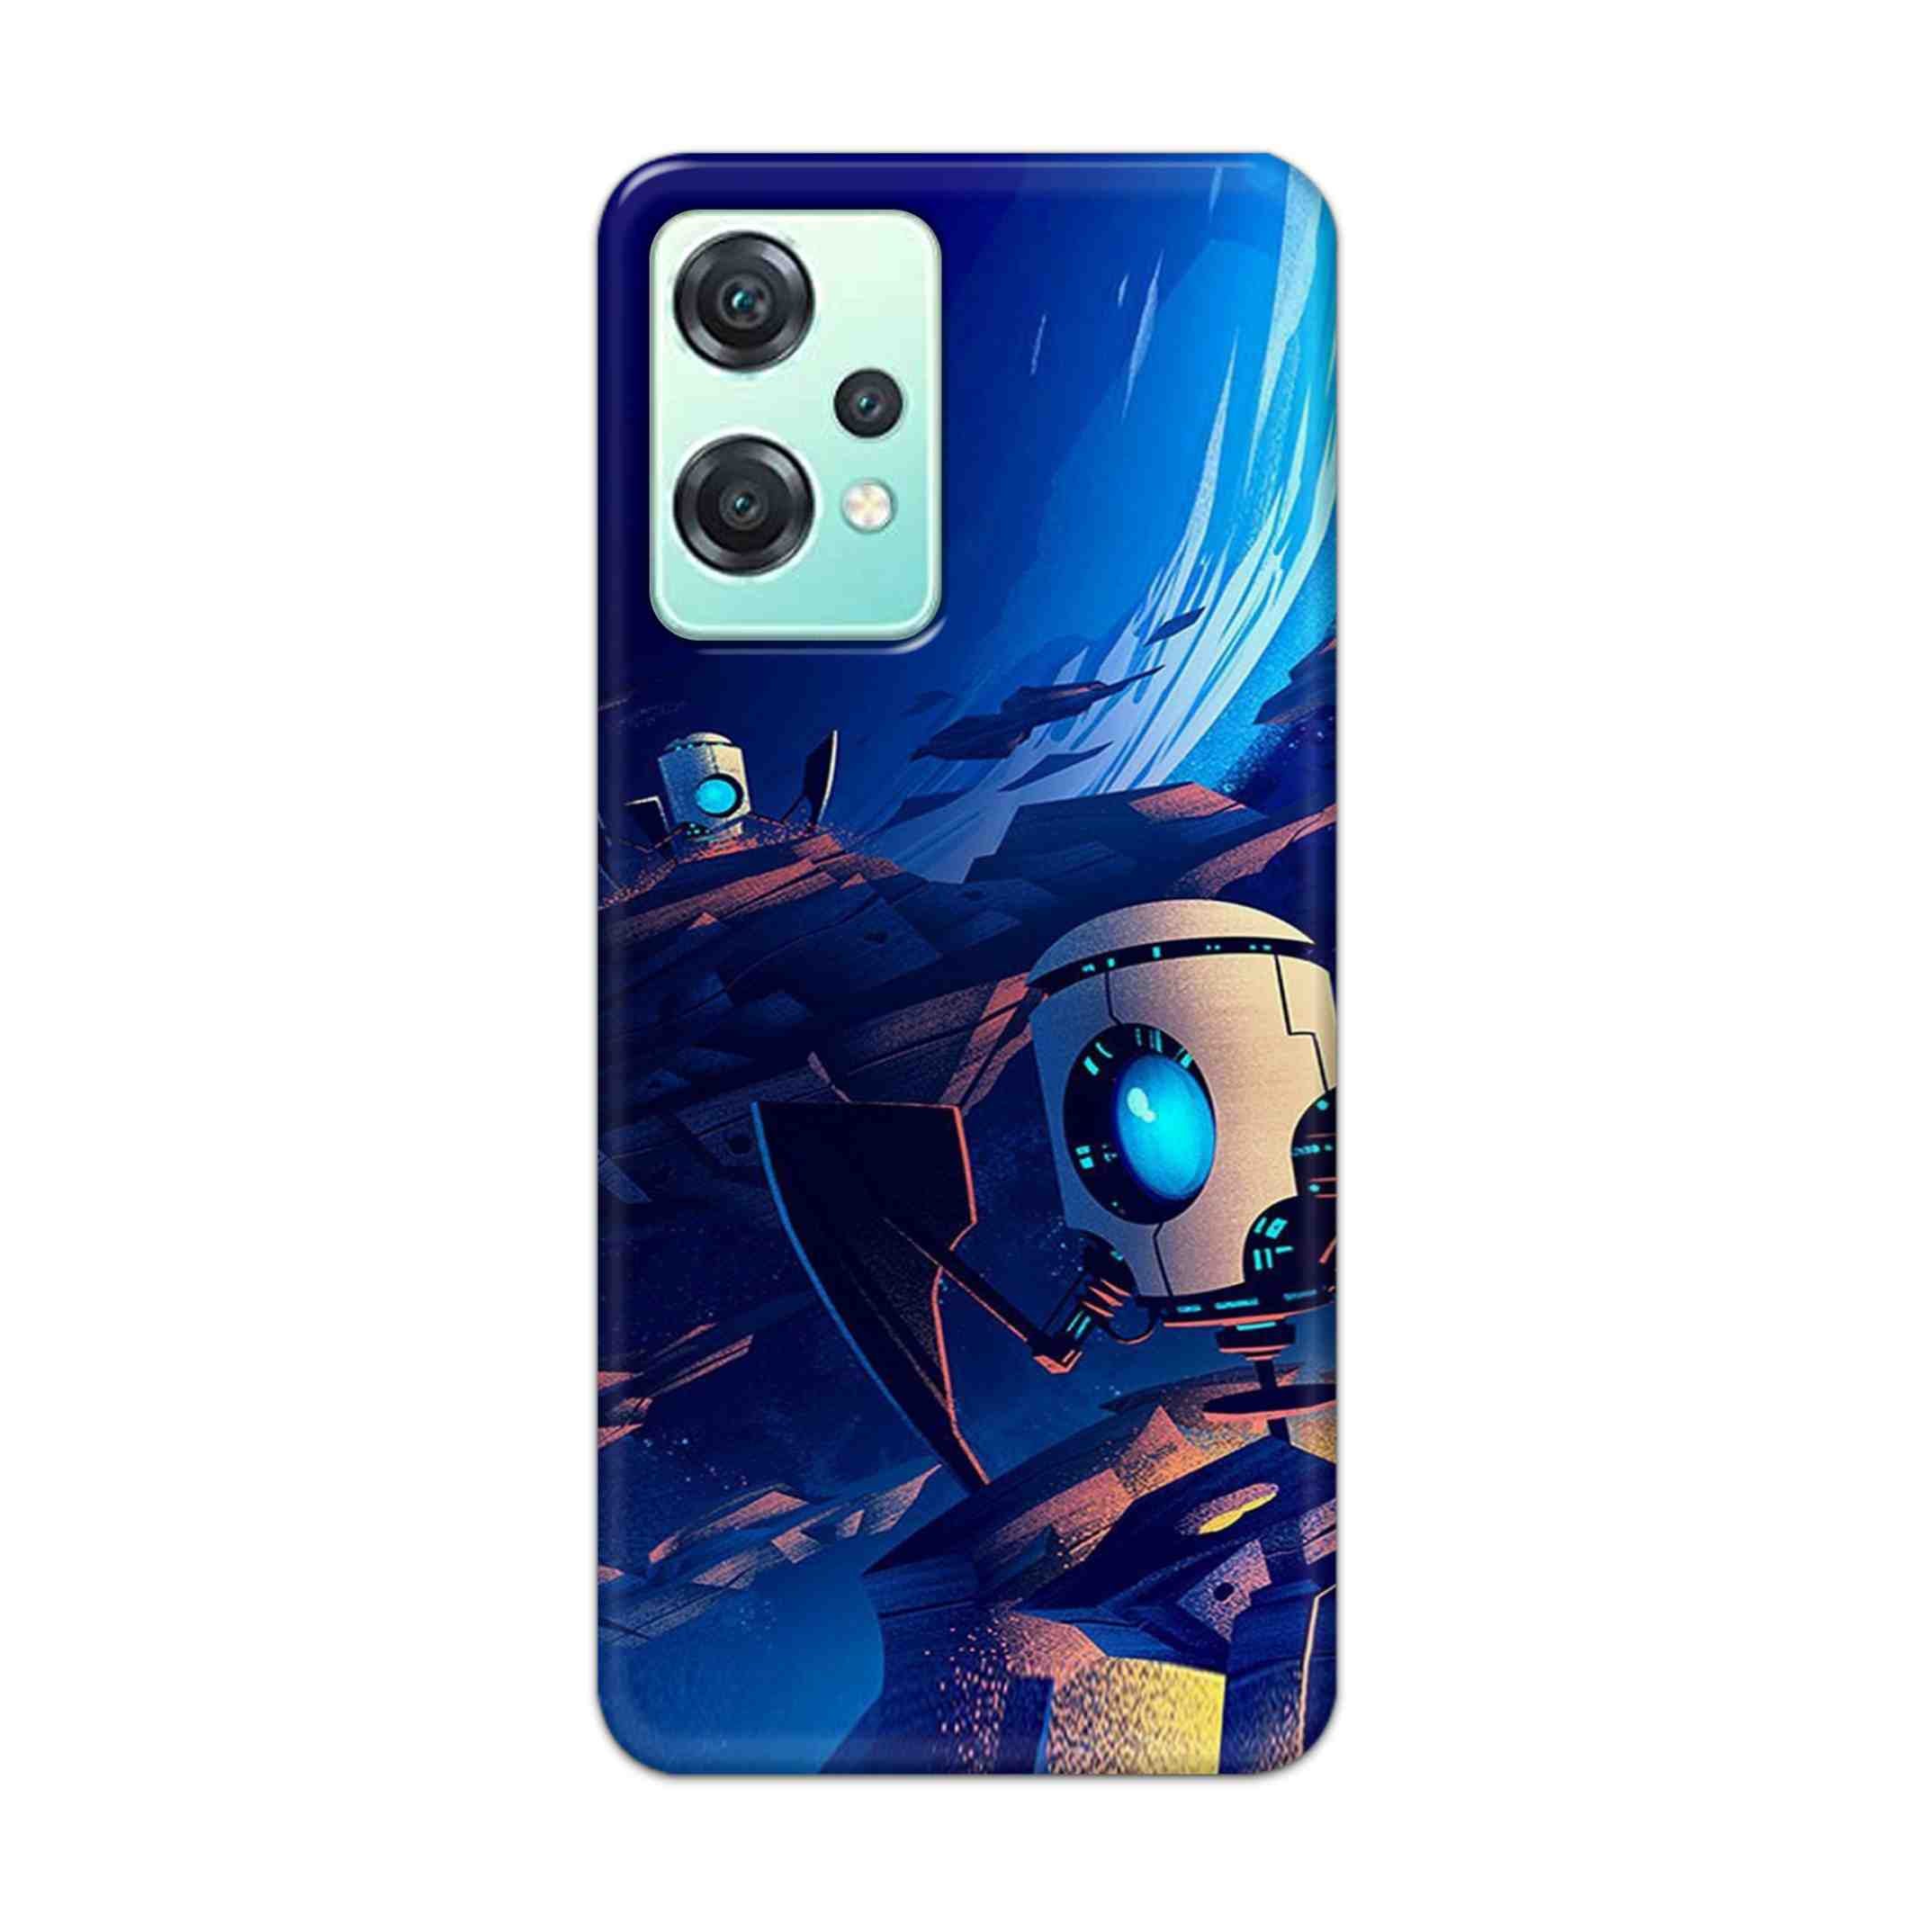 Buy Spaceship Robot Hard Back Mobile Phone Case Cover For OnePlus Nord CE 2 Lite 5G Online